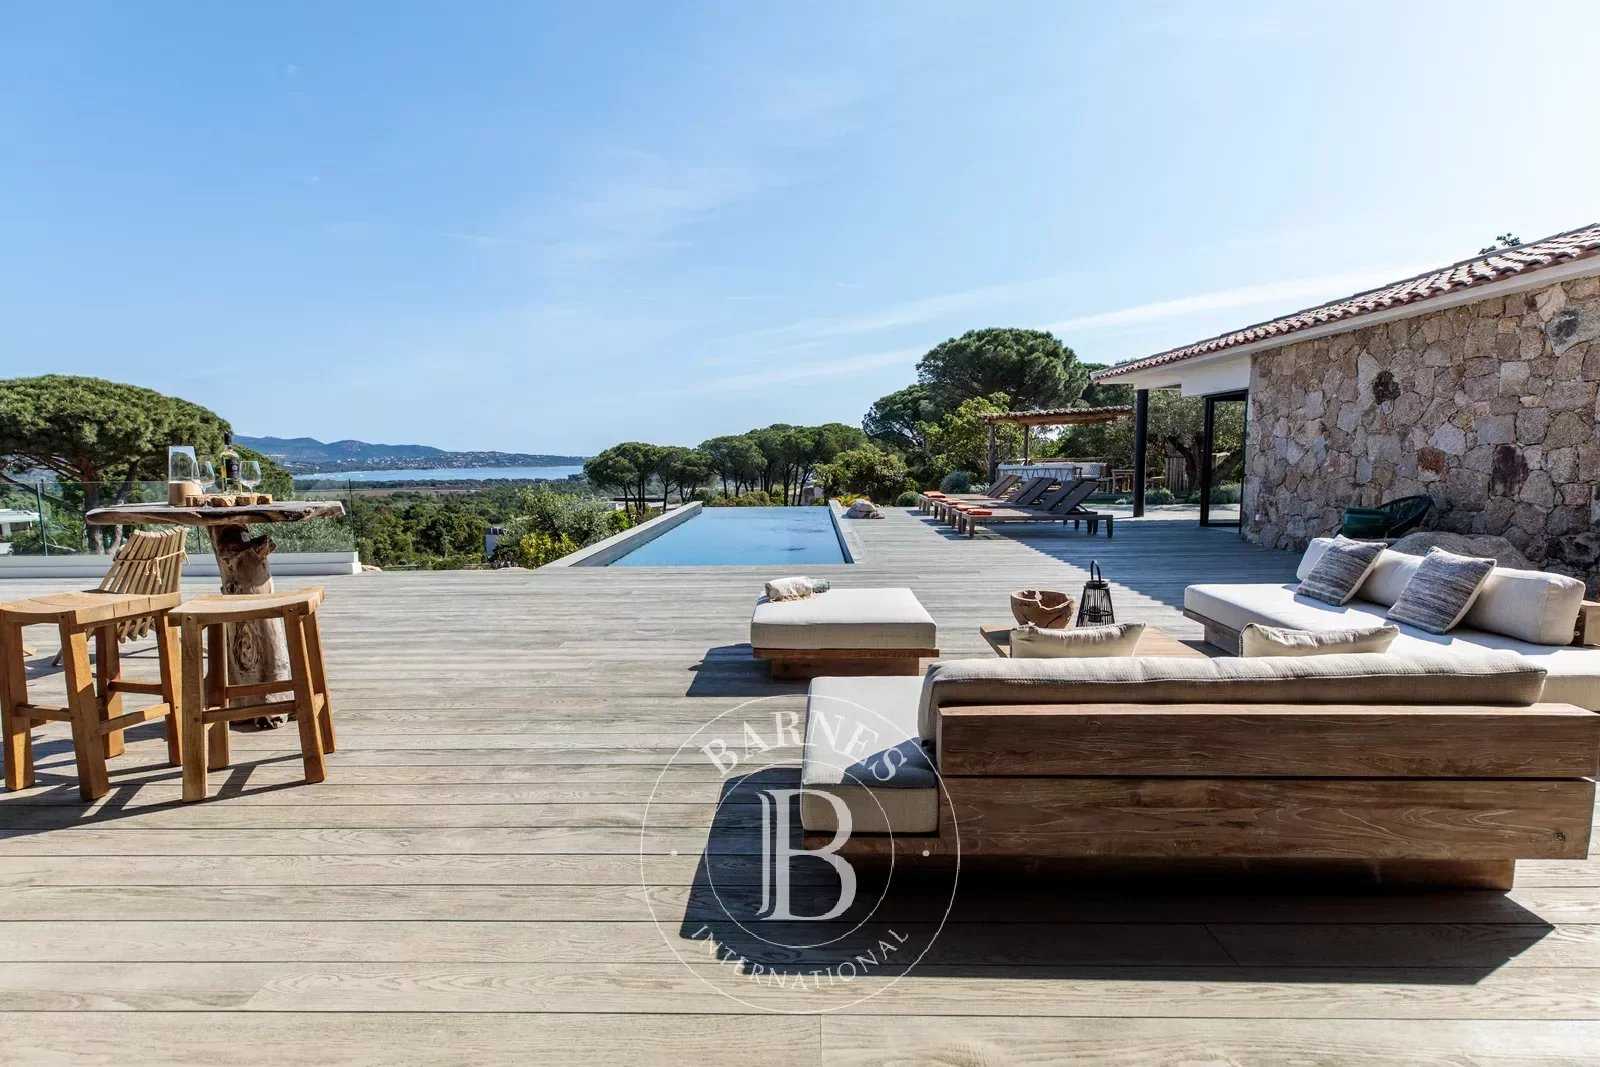 Villata, 4 bedrooms, pool and sea view, RL327 A Pinetta picture 19